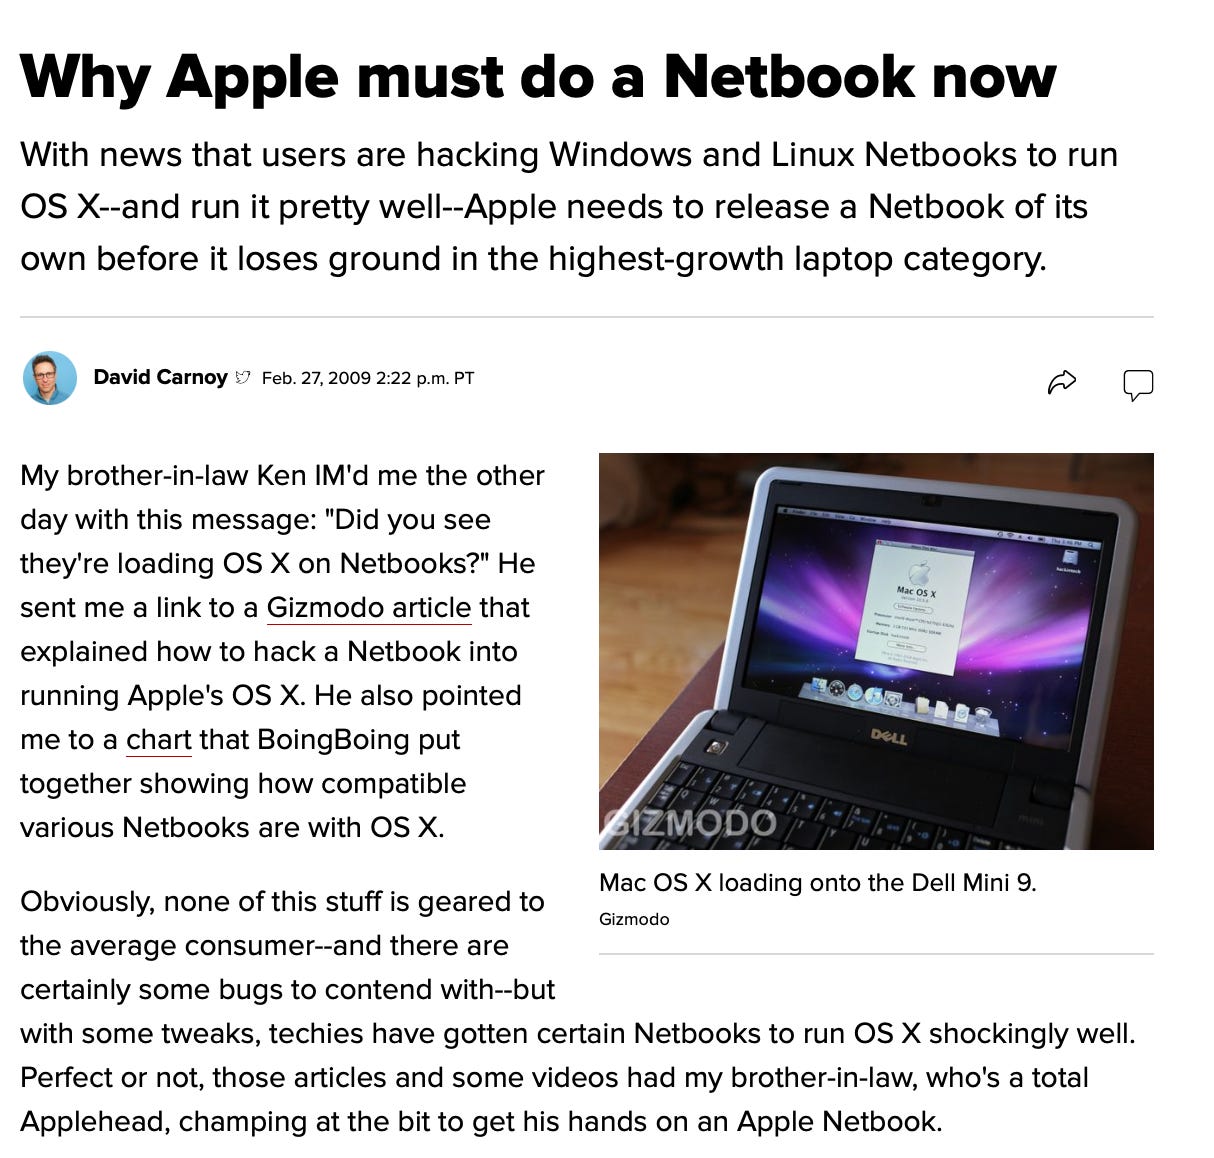 Why Apple must do a Netbook now With news that users are hacking Windows and Linux Netbooks to run OS X--and run it pretty well--Apple needs to release a Netbook of its own before it loses ground in the highest-growth laptop category. David Carnoy * Feb. 27, 2009 2:22 p.m. PT My brother-in-law Ken IM'd me the other day with this message: "Did you see they're loading OS X on Netbooks?" He Mac Os x sent me a link to a Gizmodo article that explained how to hack a Netbook into running Apple's OS X. He also pointed me to a chart that BoingBoing put 理か●の DeLL together showing how compatible various Netbooks are with OS X. BIZMODO Obviously, none of this stuff is geared to the average consumer--and there are Mac OS X loading onto the Dell Mini 9. Gizmodo certainly some bugs to contend with--but with some tweaks, techies have gotten certain Netbooks to run OS X shockingly well. Perfect or not, those articles and some videos had my brother-in-law, who's a total Applehead, champing at the bit to get his hands on an Apple Netbook.